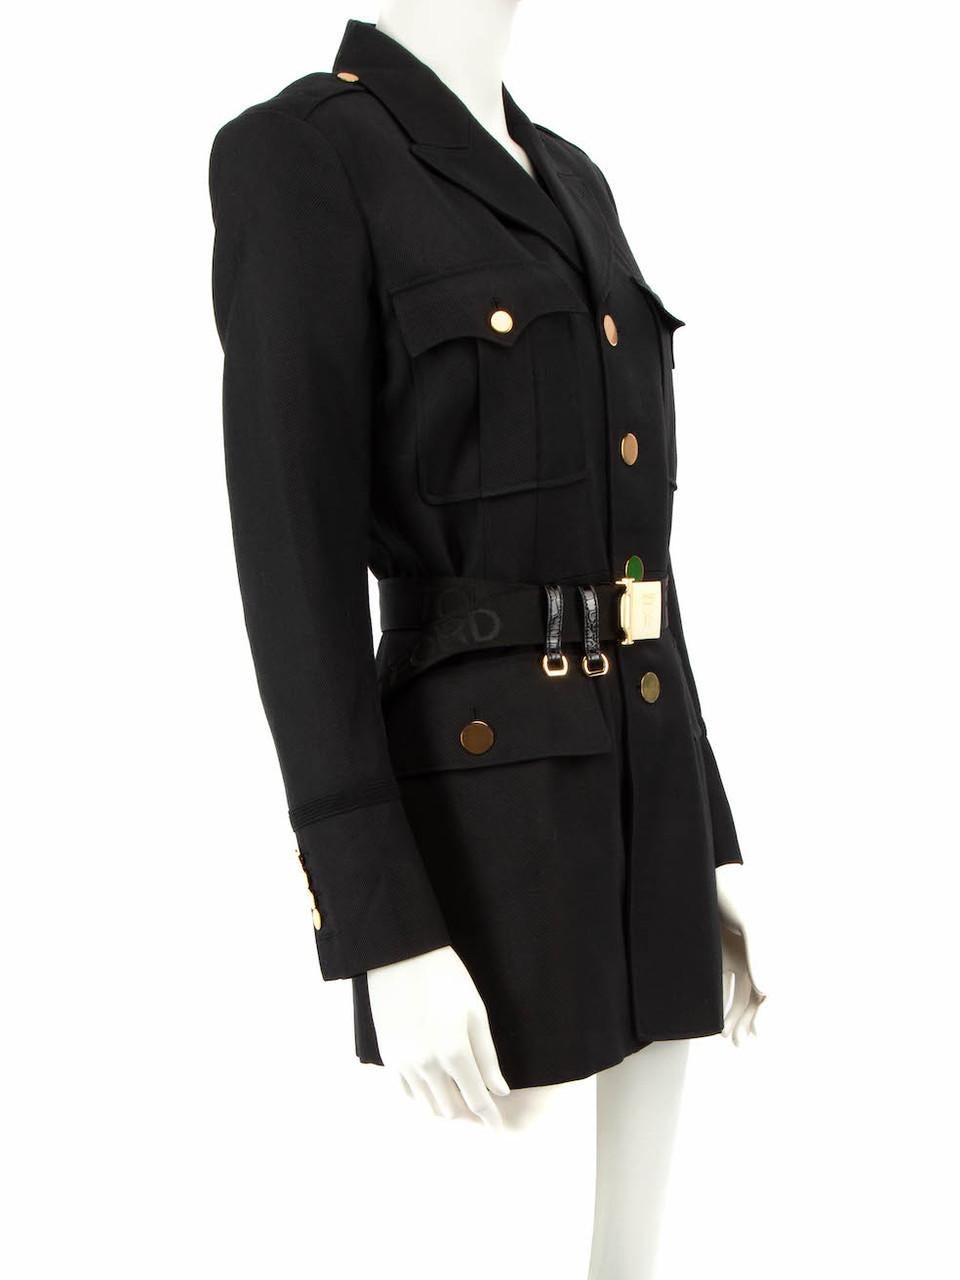 CONDITION is Never worn, with tags. No visible wear to coat is evident on this new Tom Ford designer resale item.
 
Details
Black
Wool
Military style coat
Mid length
Single breasted
4x Front buttoned flap pockets
Buttoned cuffs
Logo branded belt
2x